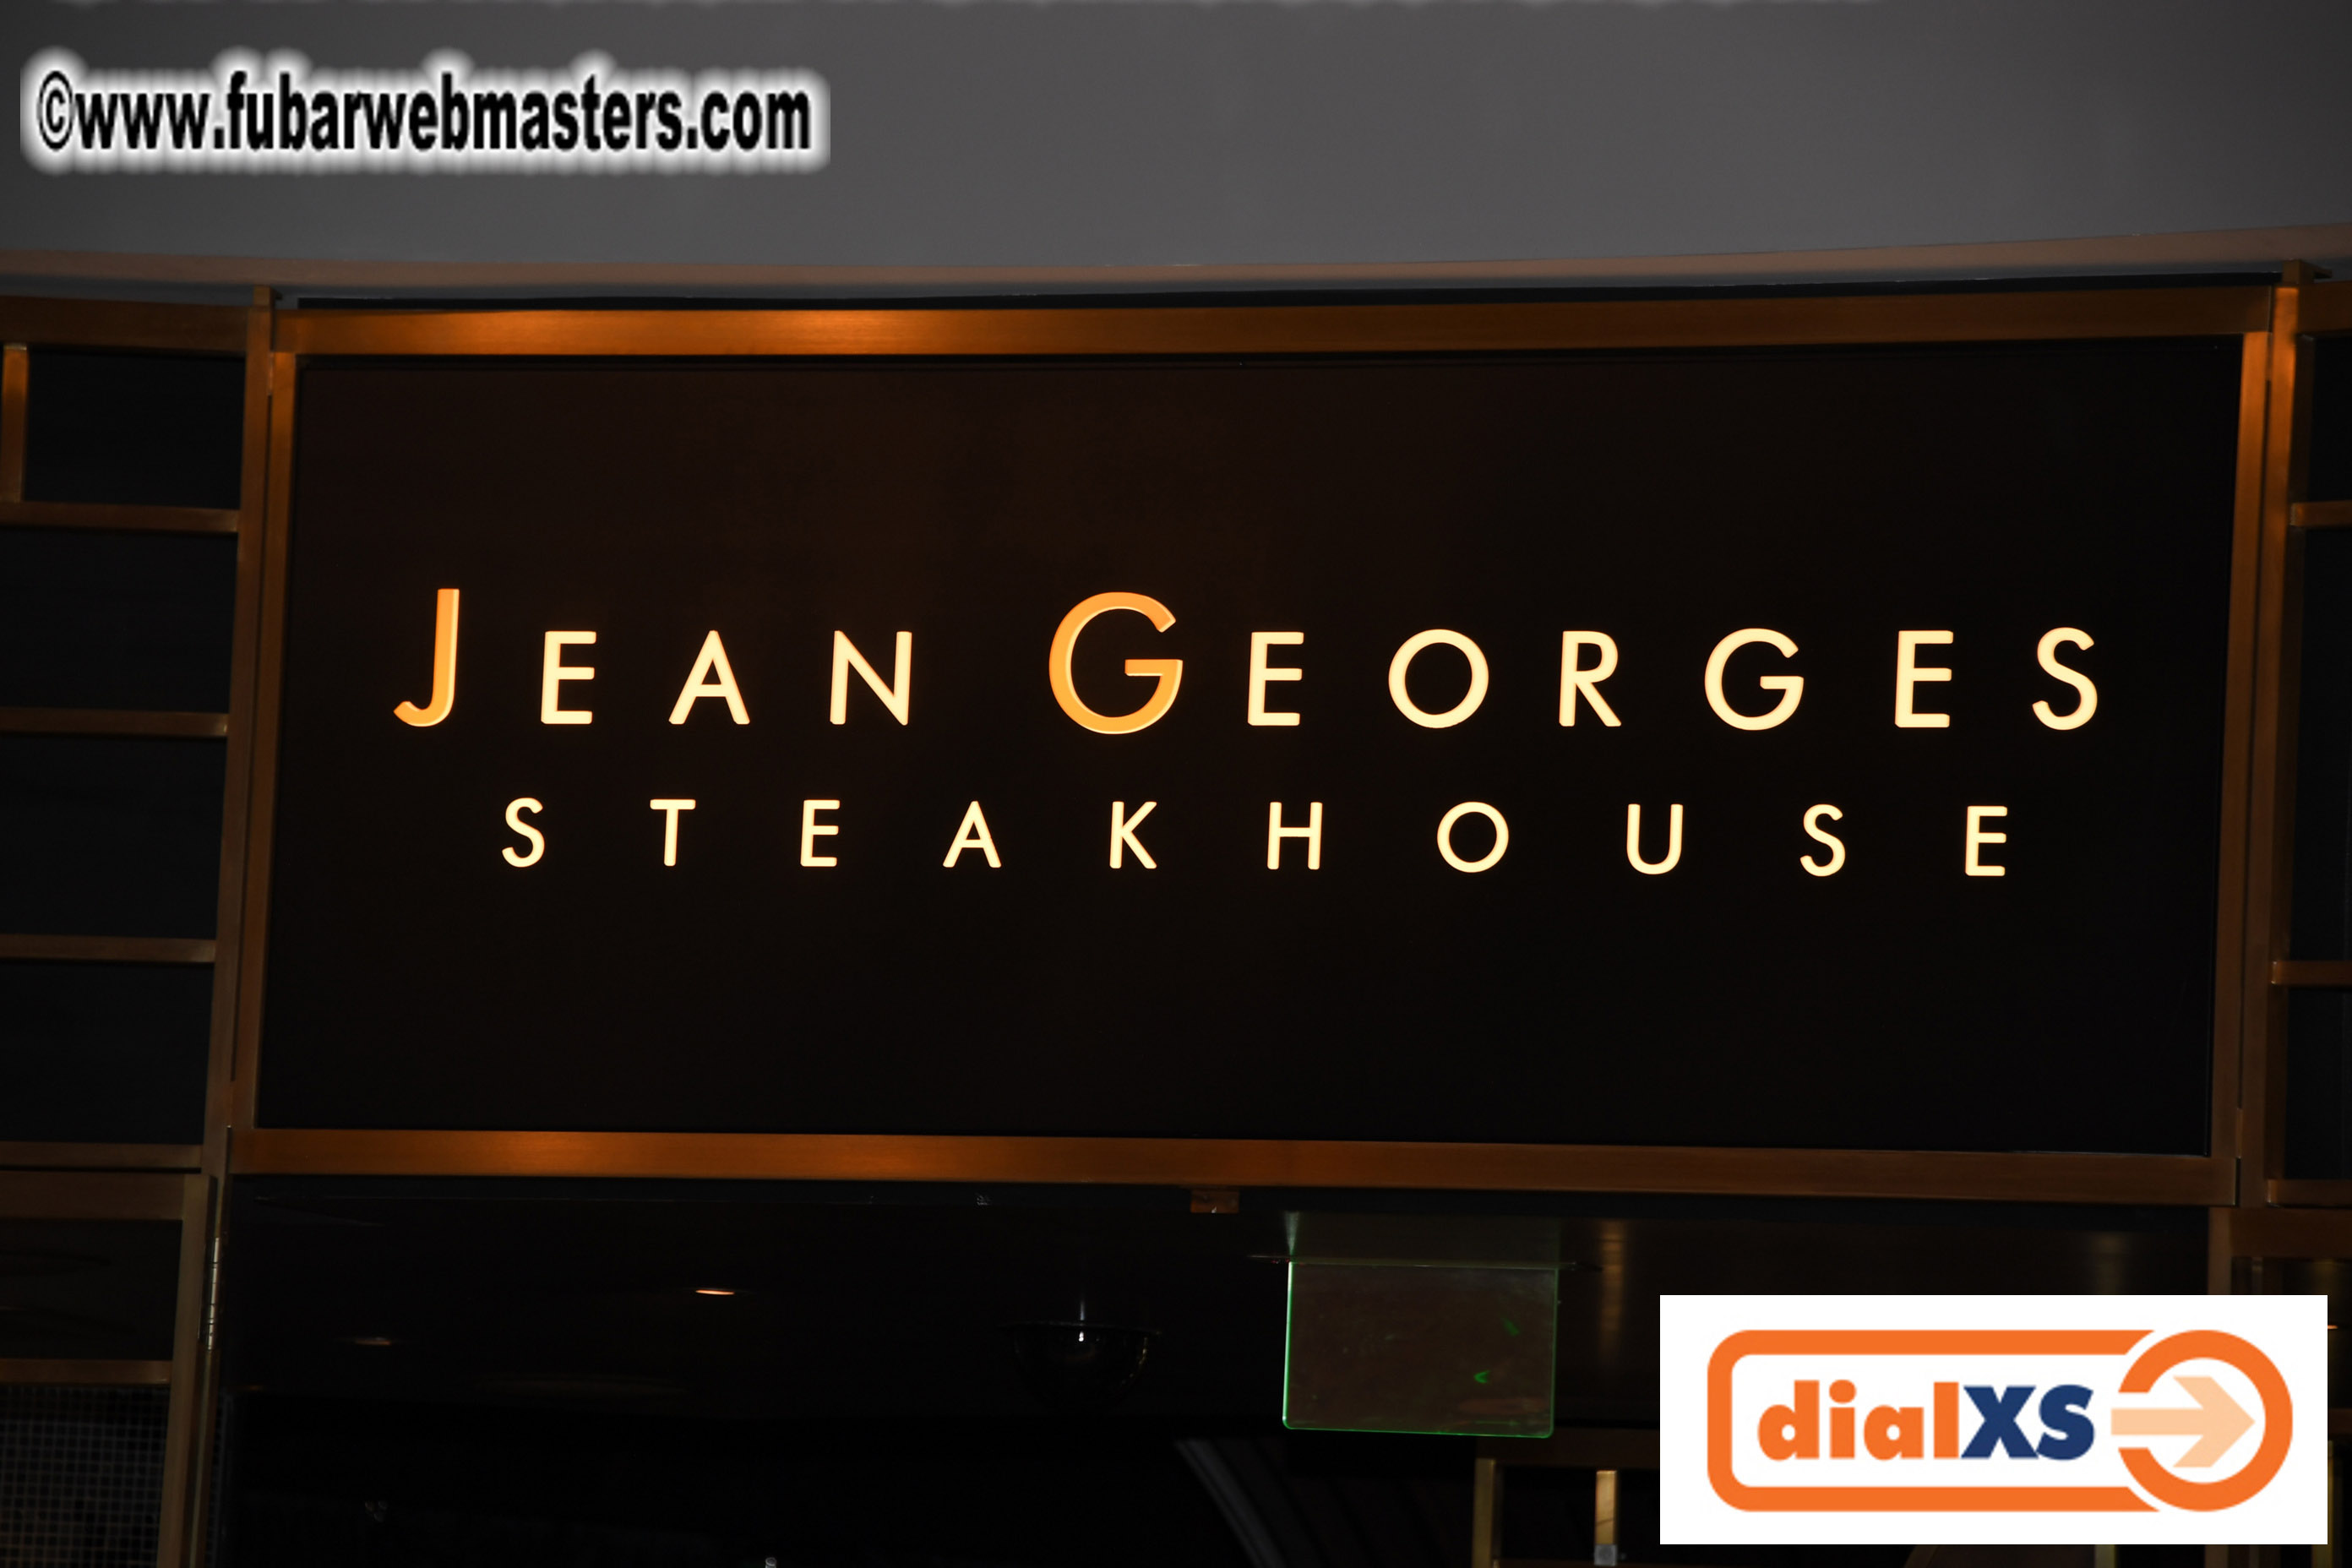 Payze Dinner at Jean Georges Steakhouse